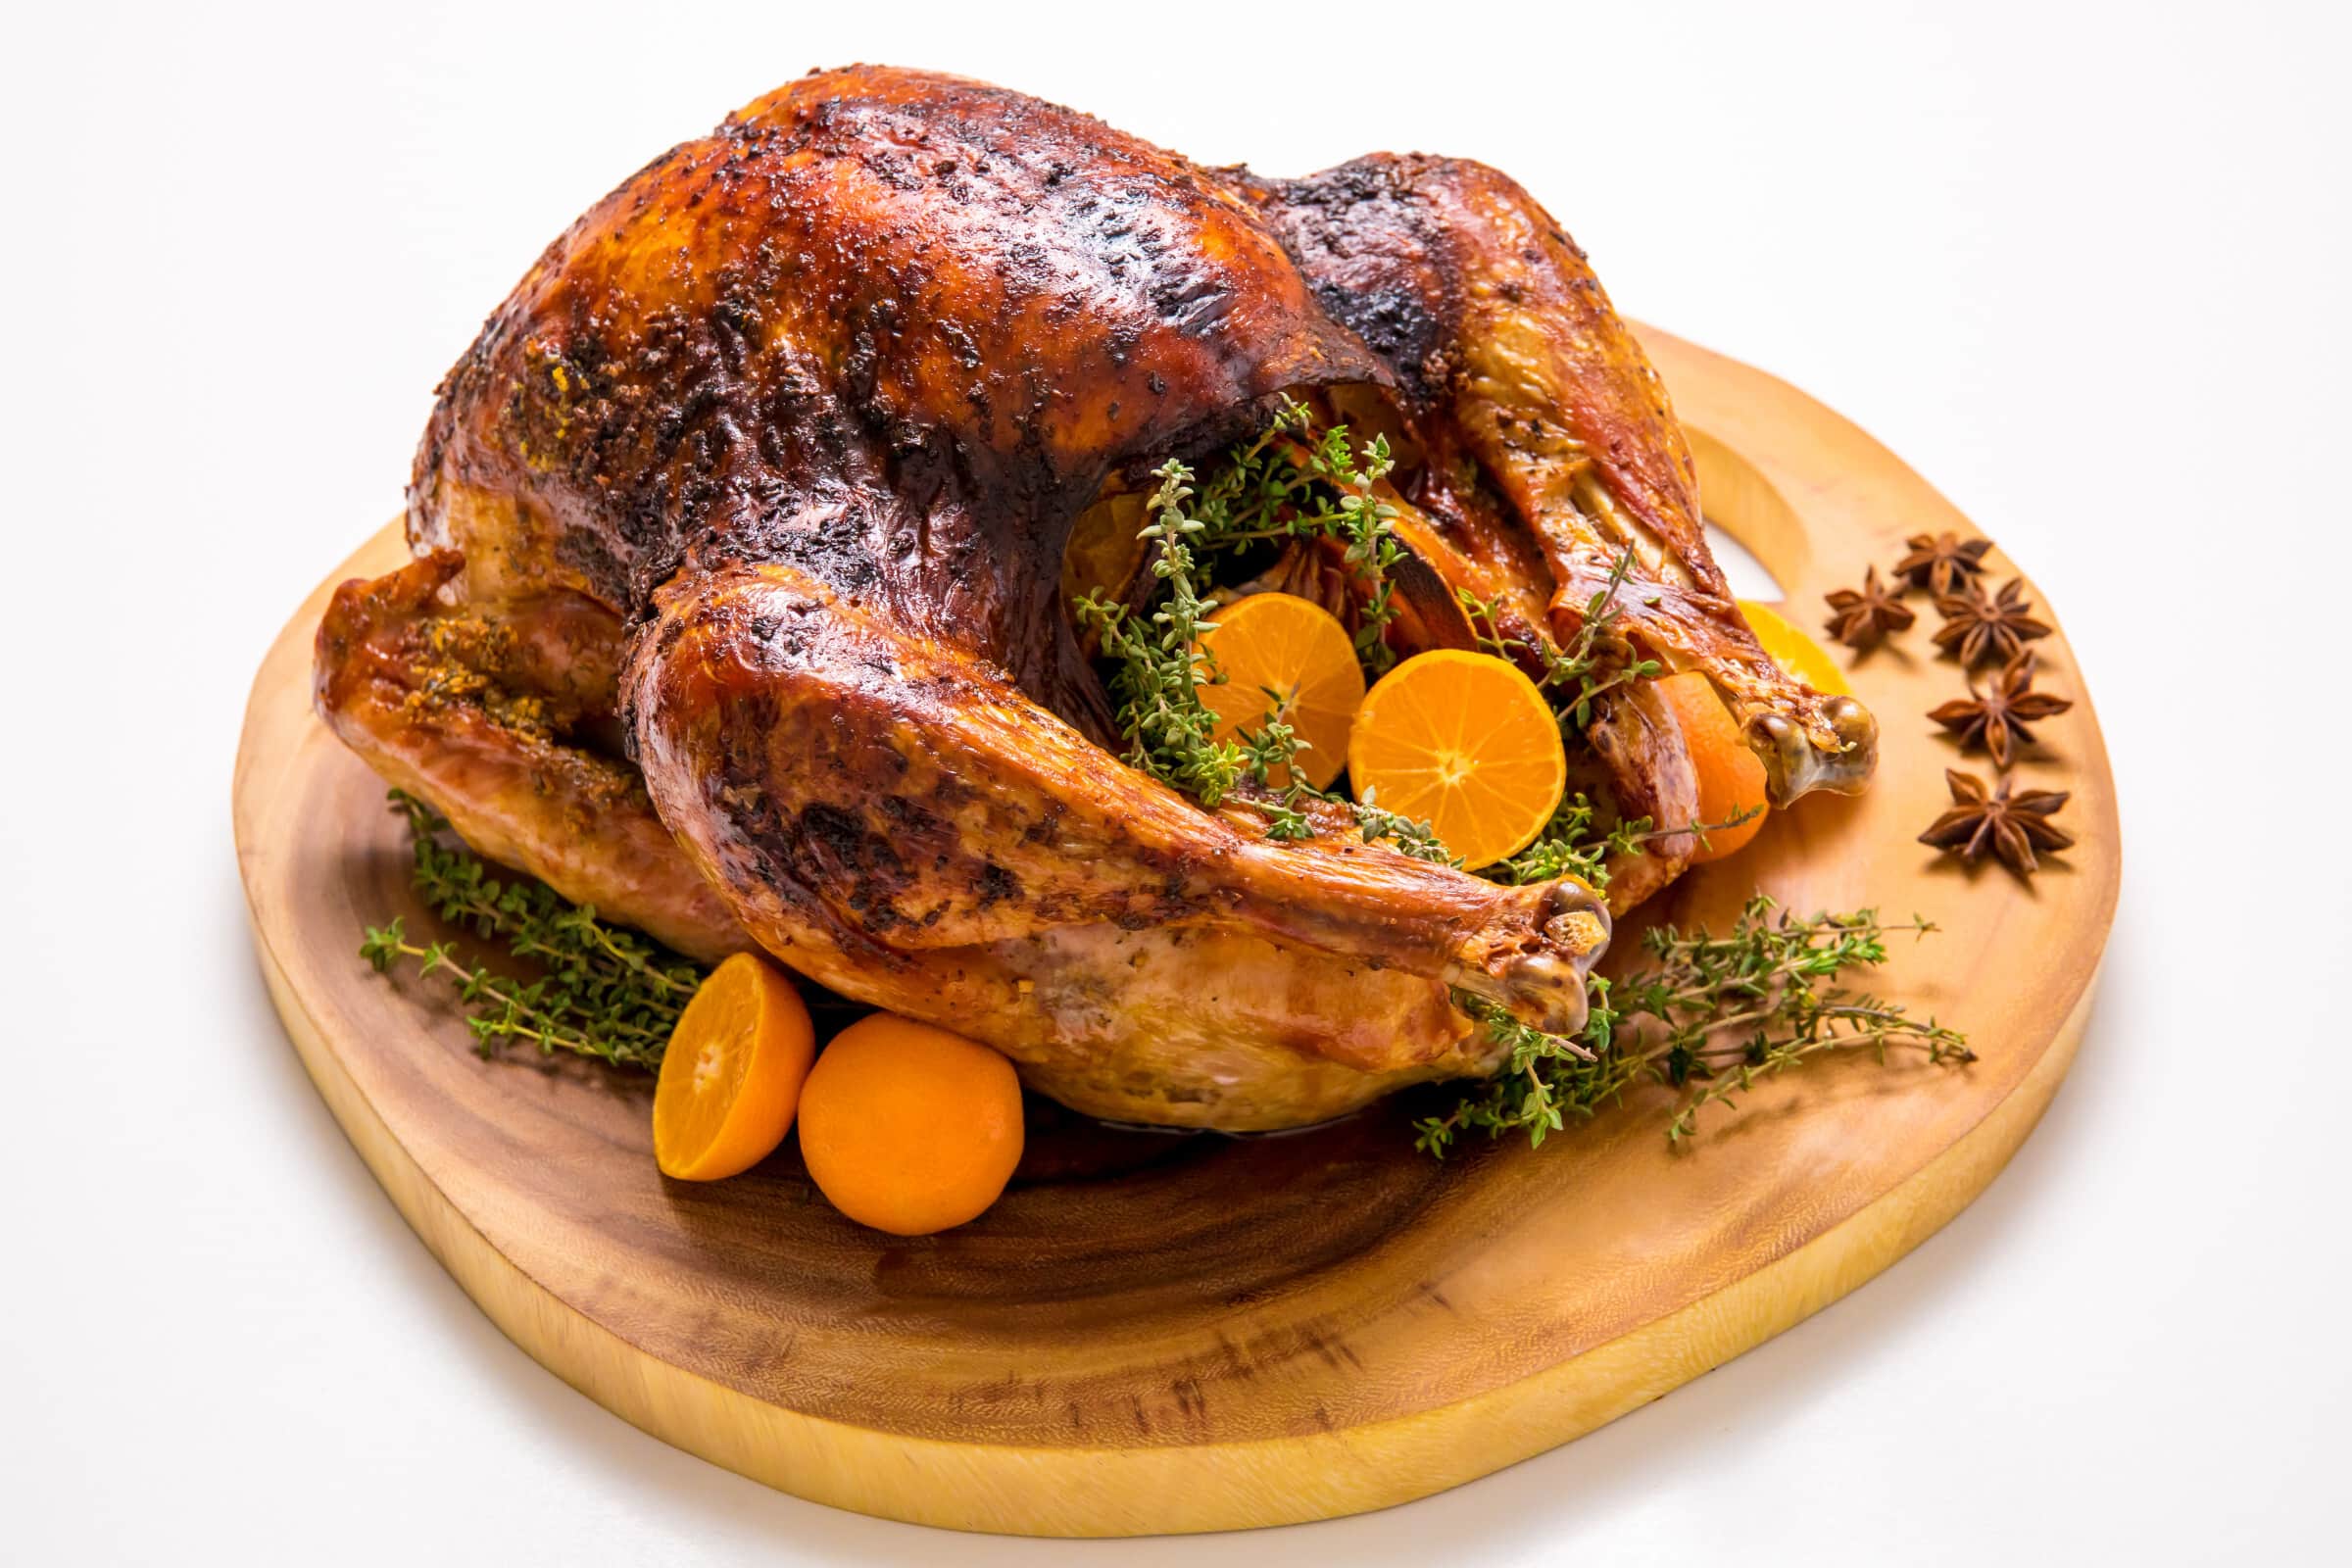 Easy And Delicious Orange Anise And Thyme Roasted Turkey,Getting Rid Of Poison Ivy On Skin